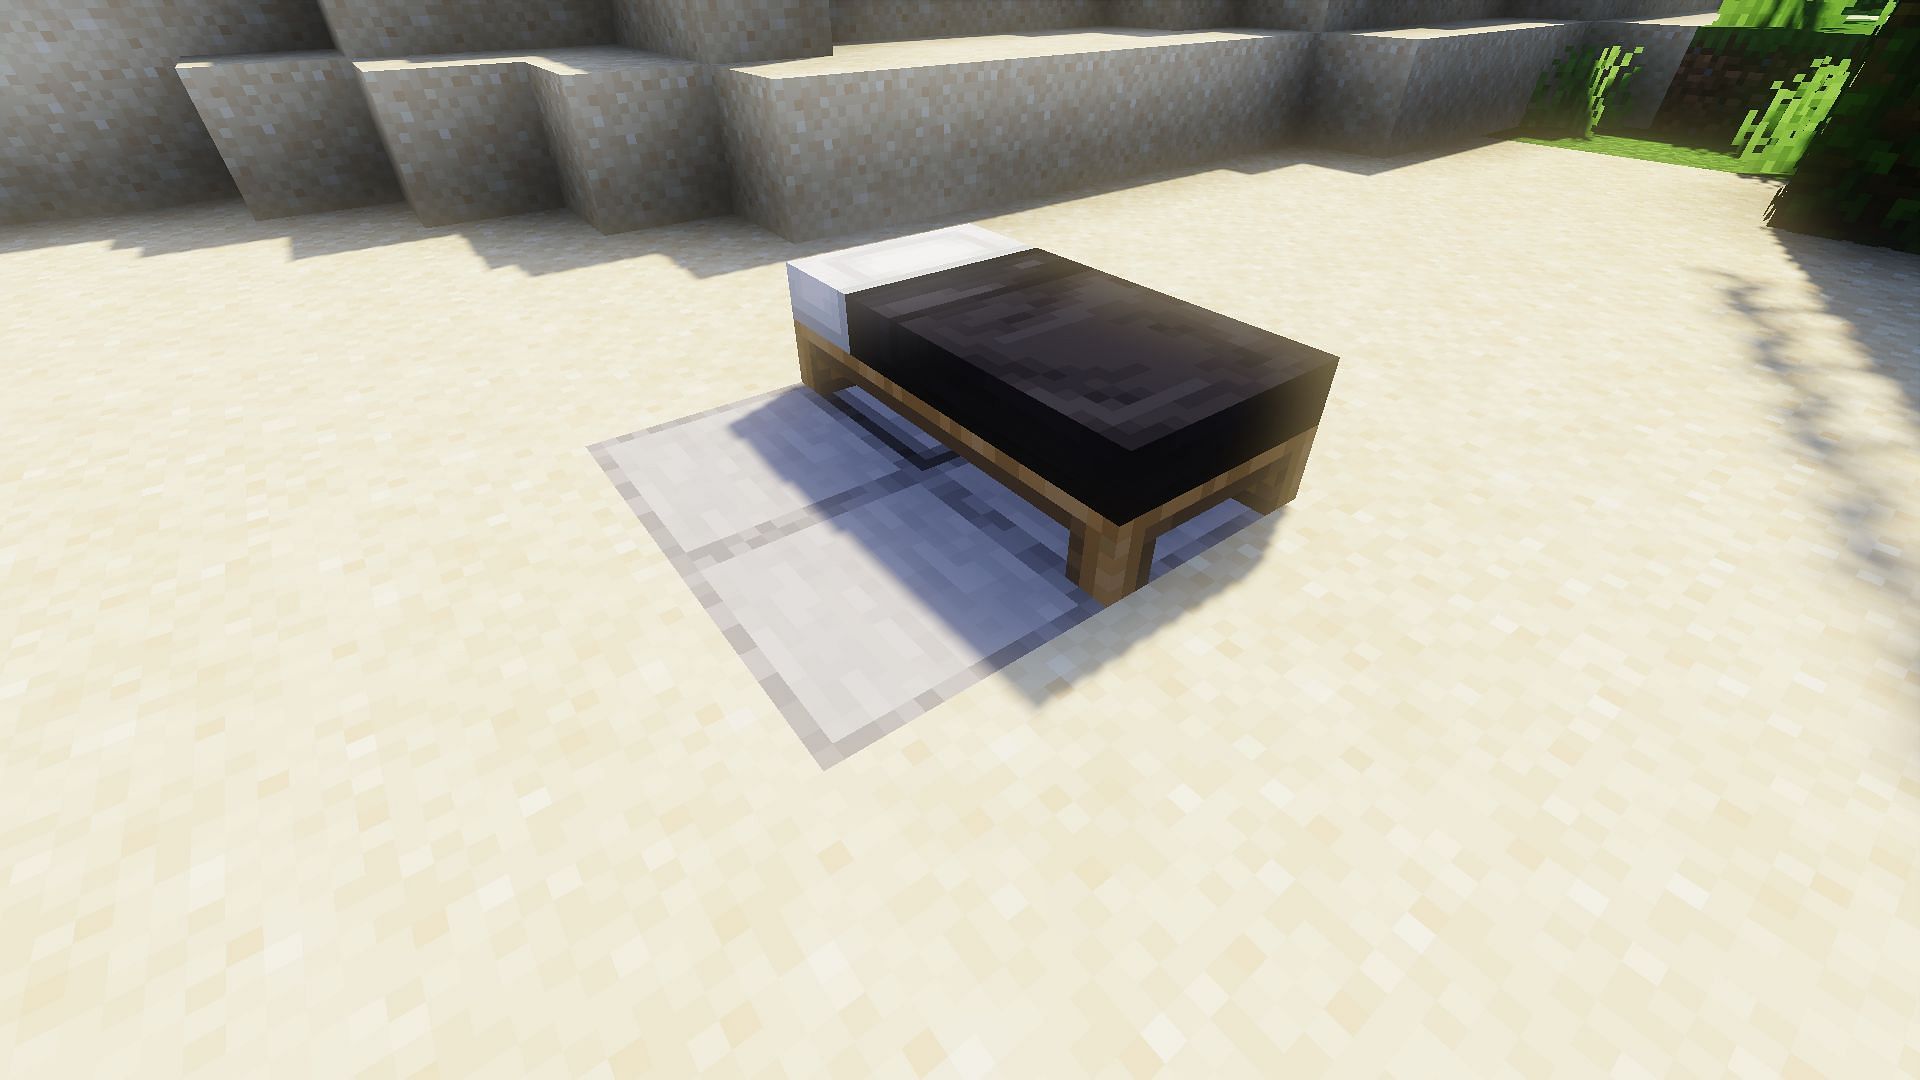 The explosives being covered by stone, slightly matching the observer (Image via Minecraft)